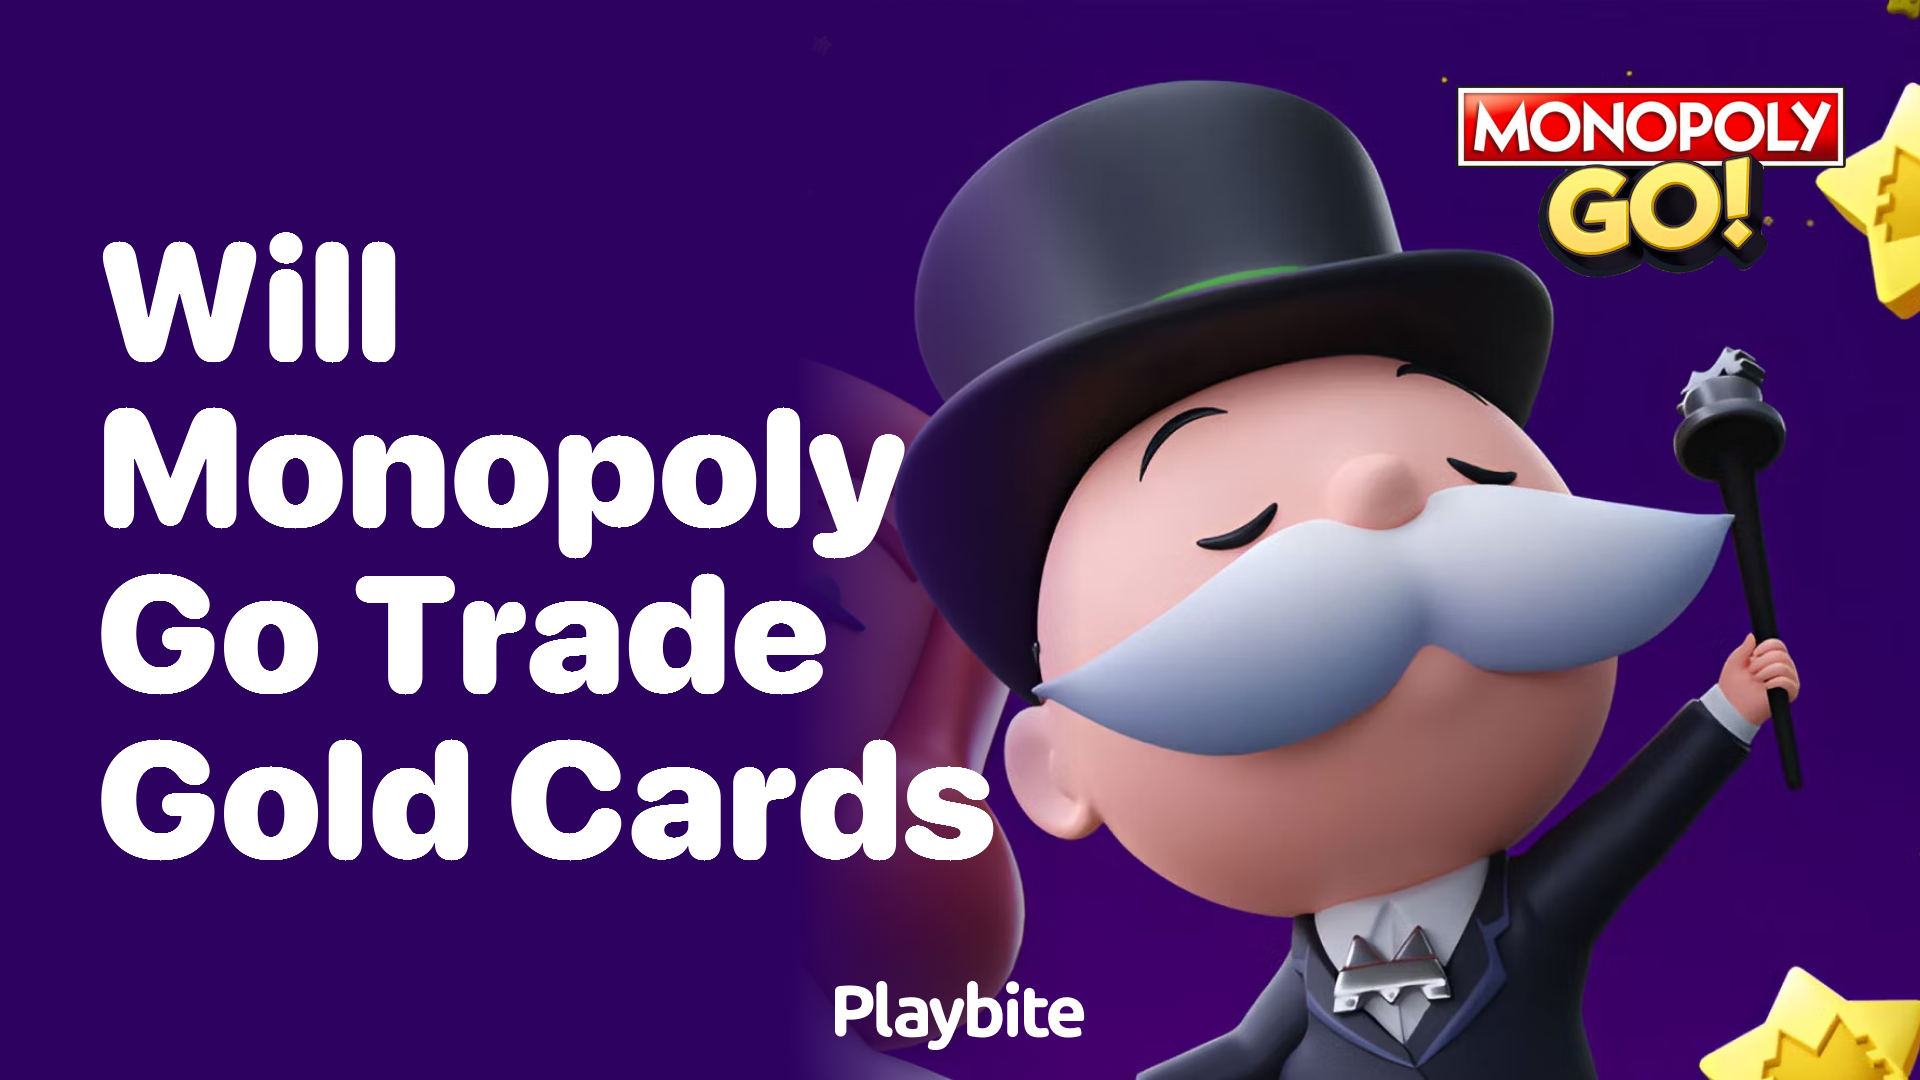 Will Monopoly Go Trade Gold Cards? Let&#8217;s Find Out!